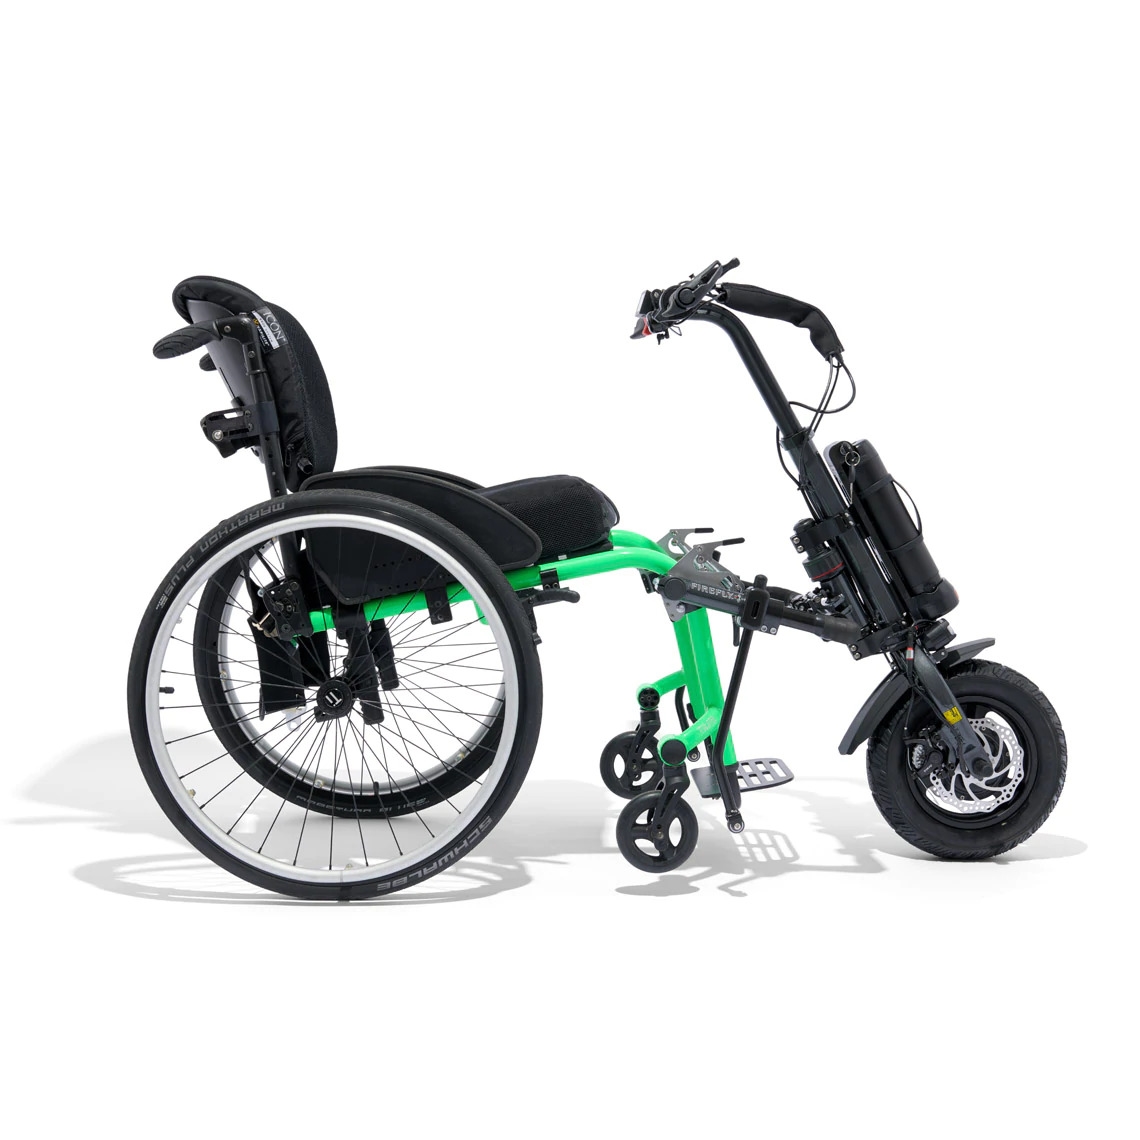 Rio Mobility FIREFLY 2.5 handcycle attachment for Wheelchairs - Power Assist